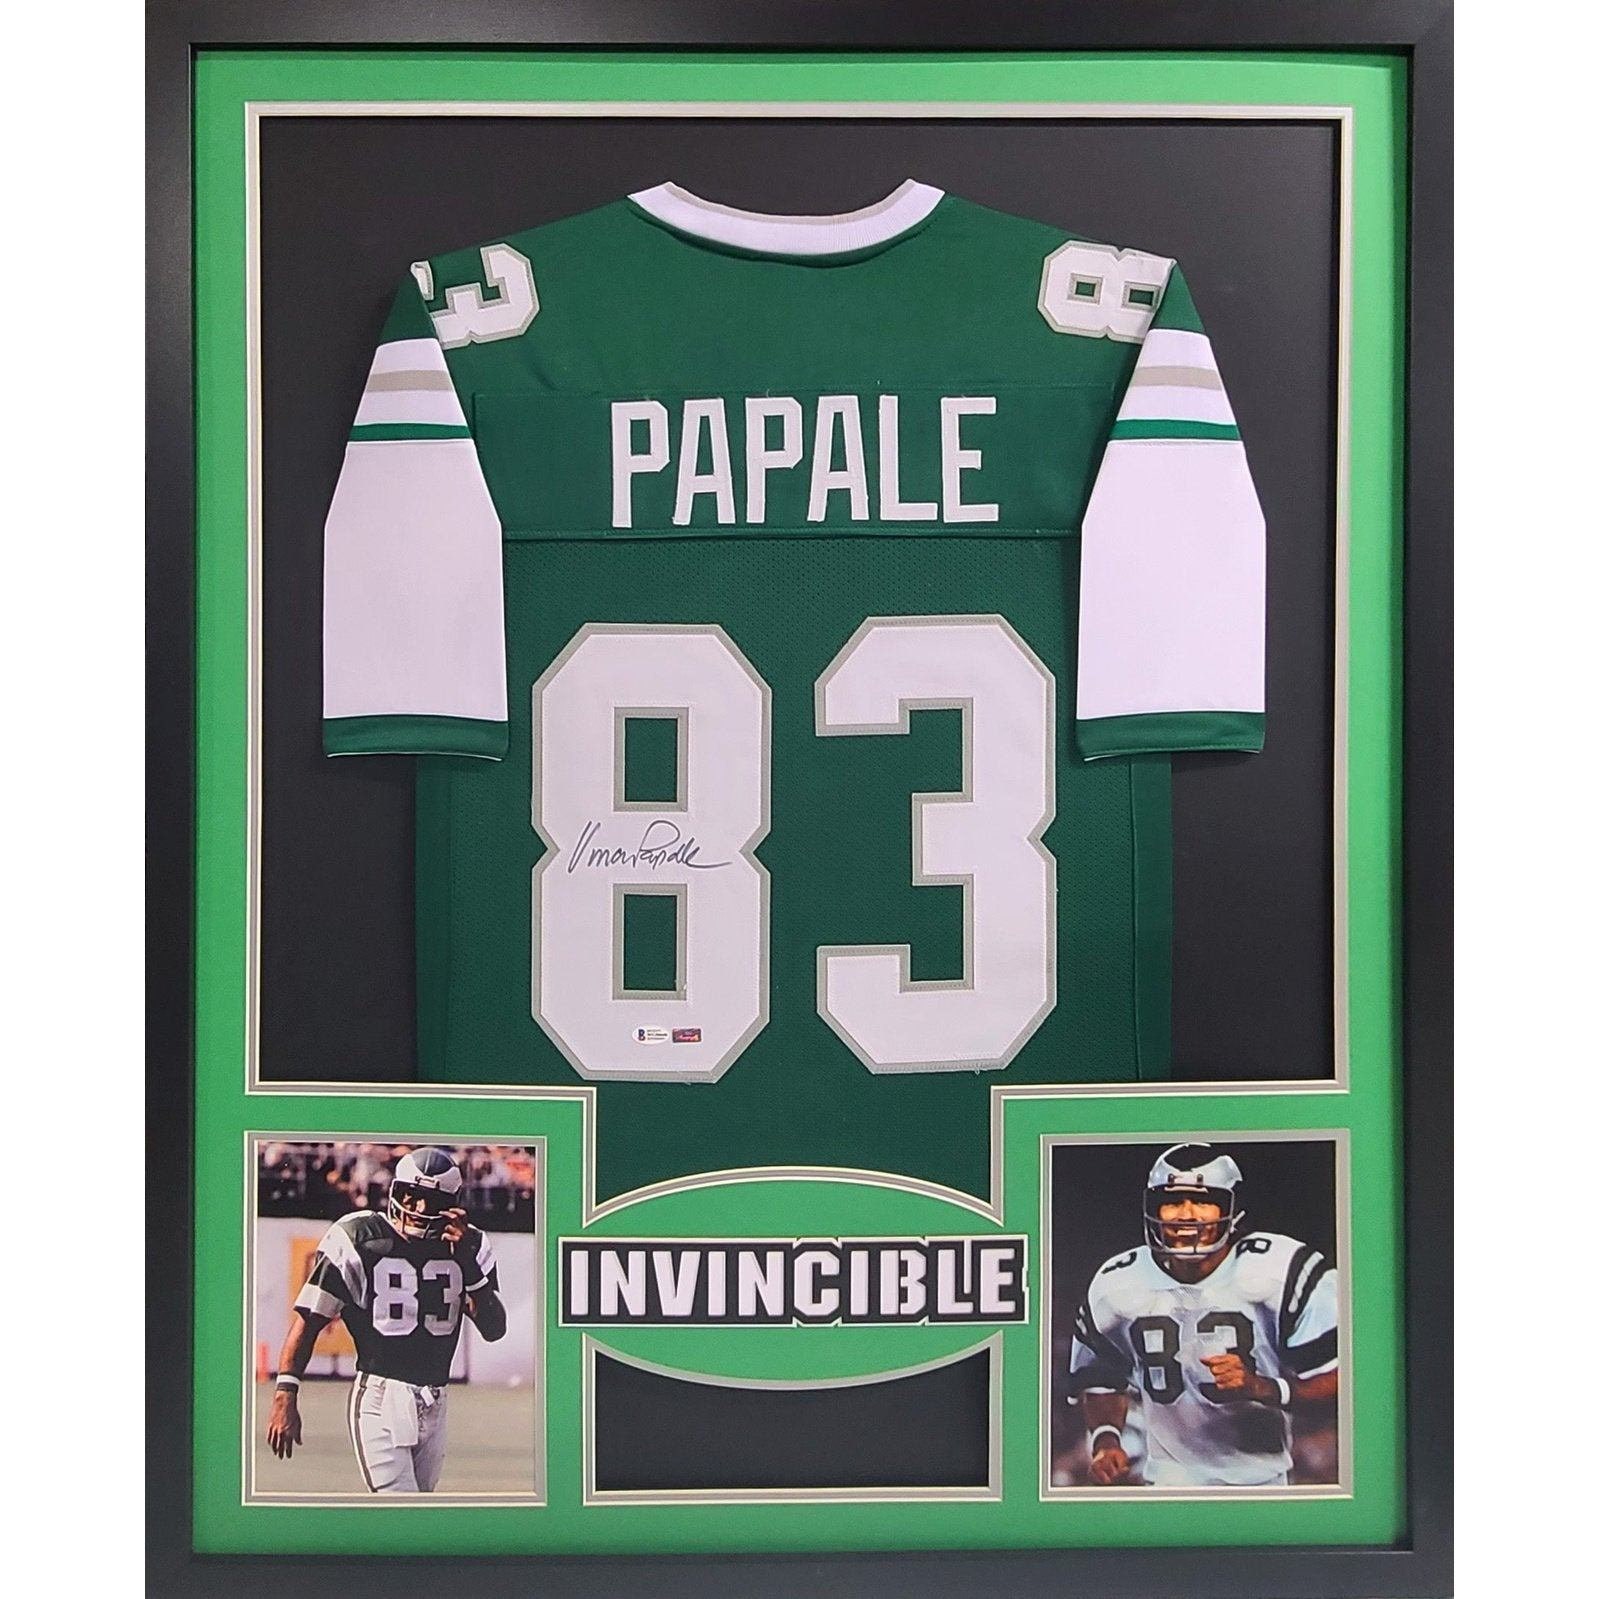  Eagles Vince Papale Signed Green Throwback Jersey w/Invincible  - Schwartz Authenticated : Sports & Outdoors